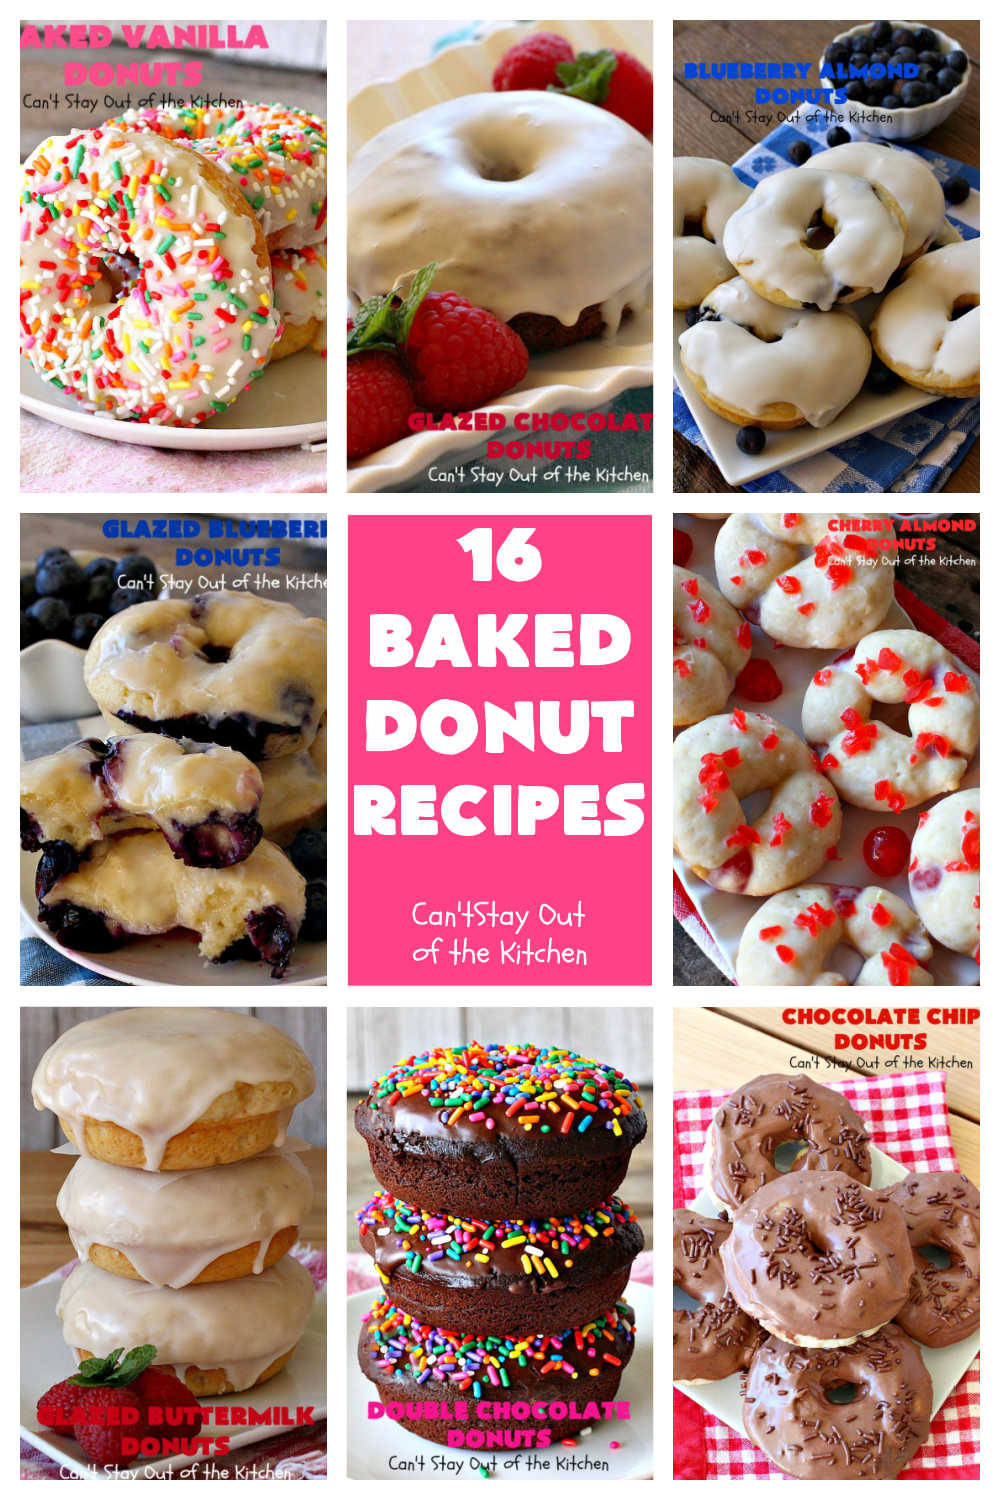 16 Baked Donut Recipes | Can't Stay Out of the Kitchen | 16 of the BEST #donut #recipes ever! Perfect for #Easter or other #holiday #breakfasts. #BakedDonuts #donuts #16BakedDonutRecipes